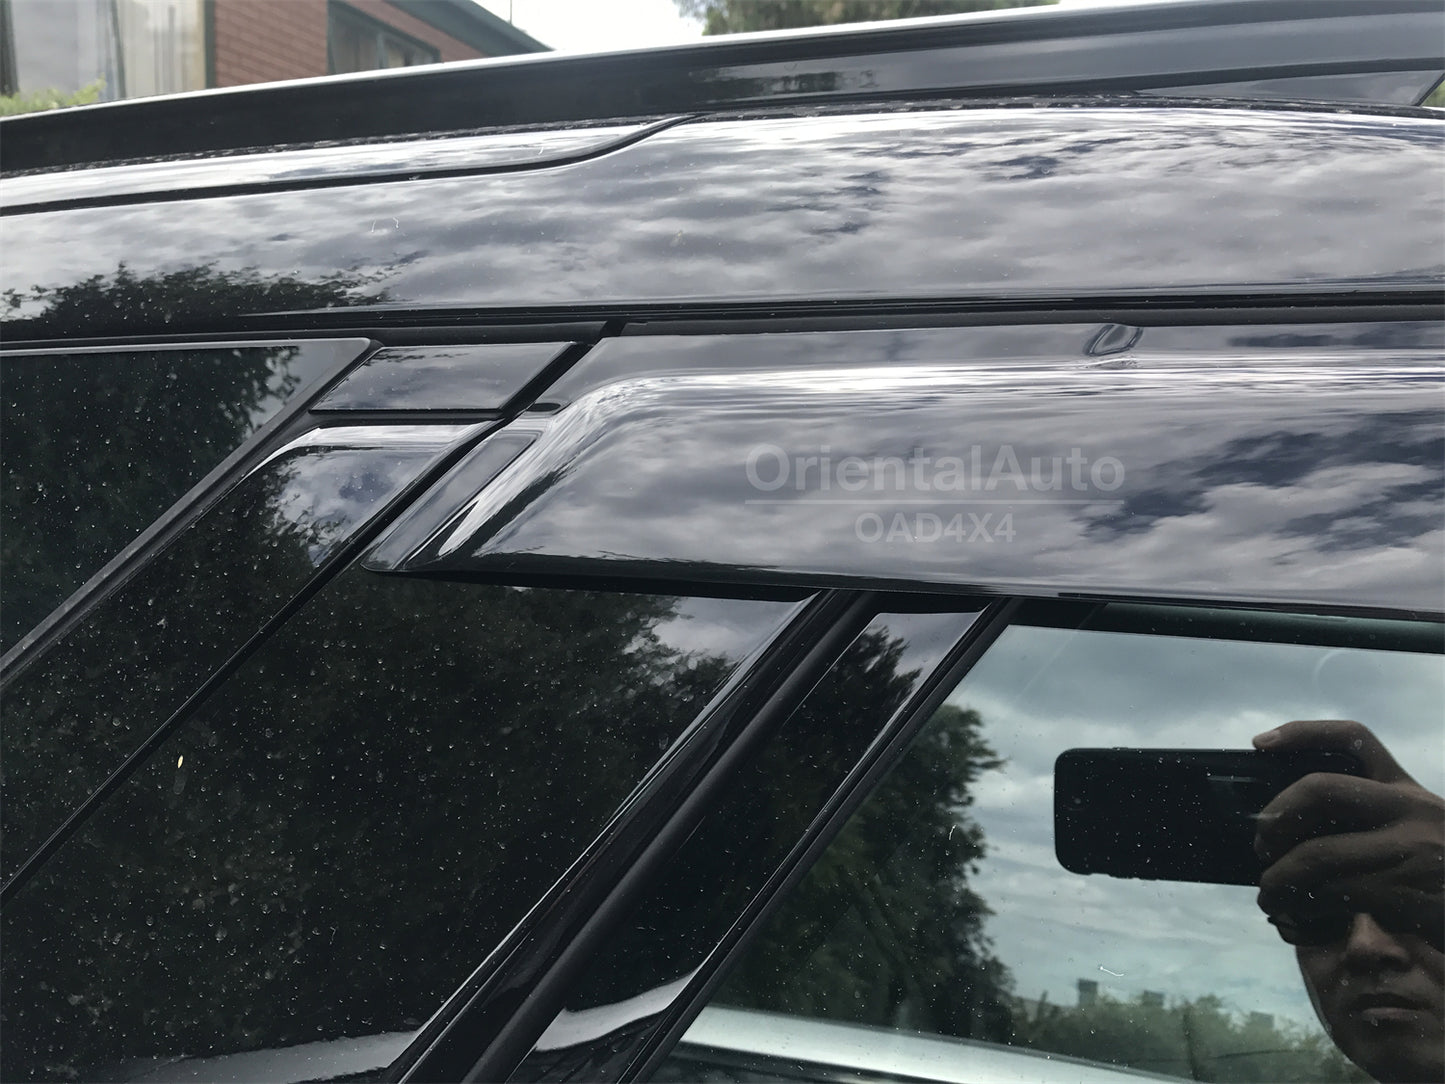 Premium Weathershields For Land Rover Discovery 5 Series 2017+ T Weather Shields Window Visor